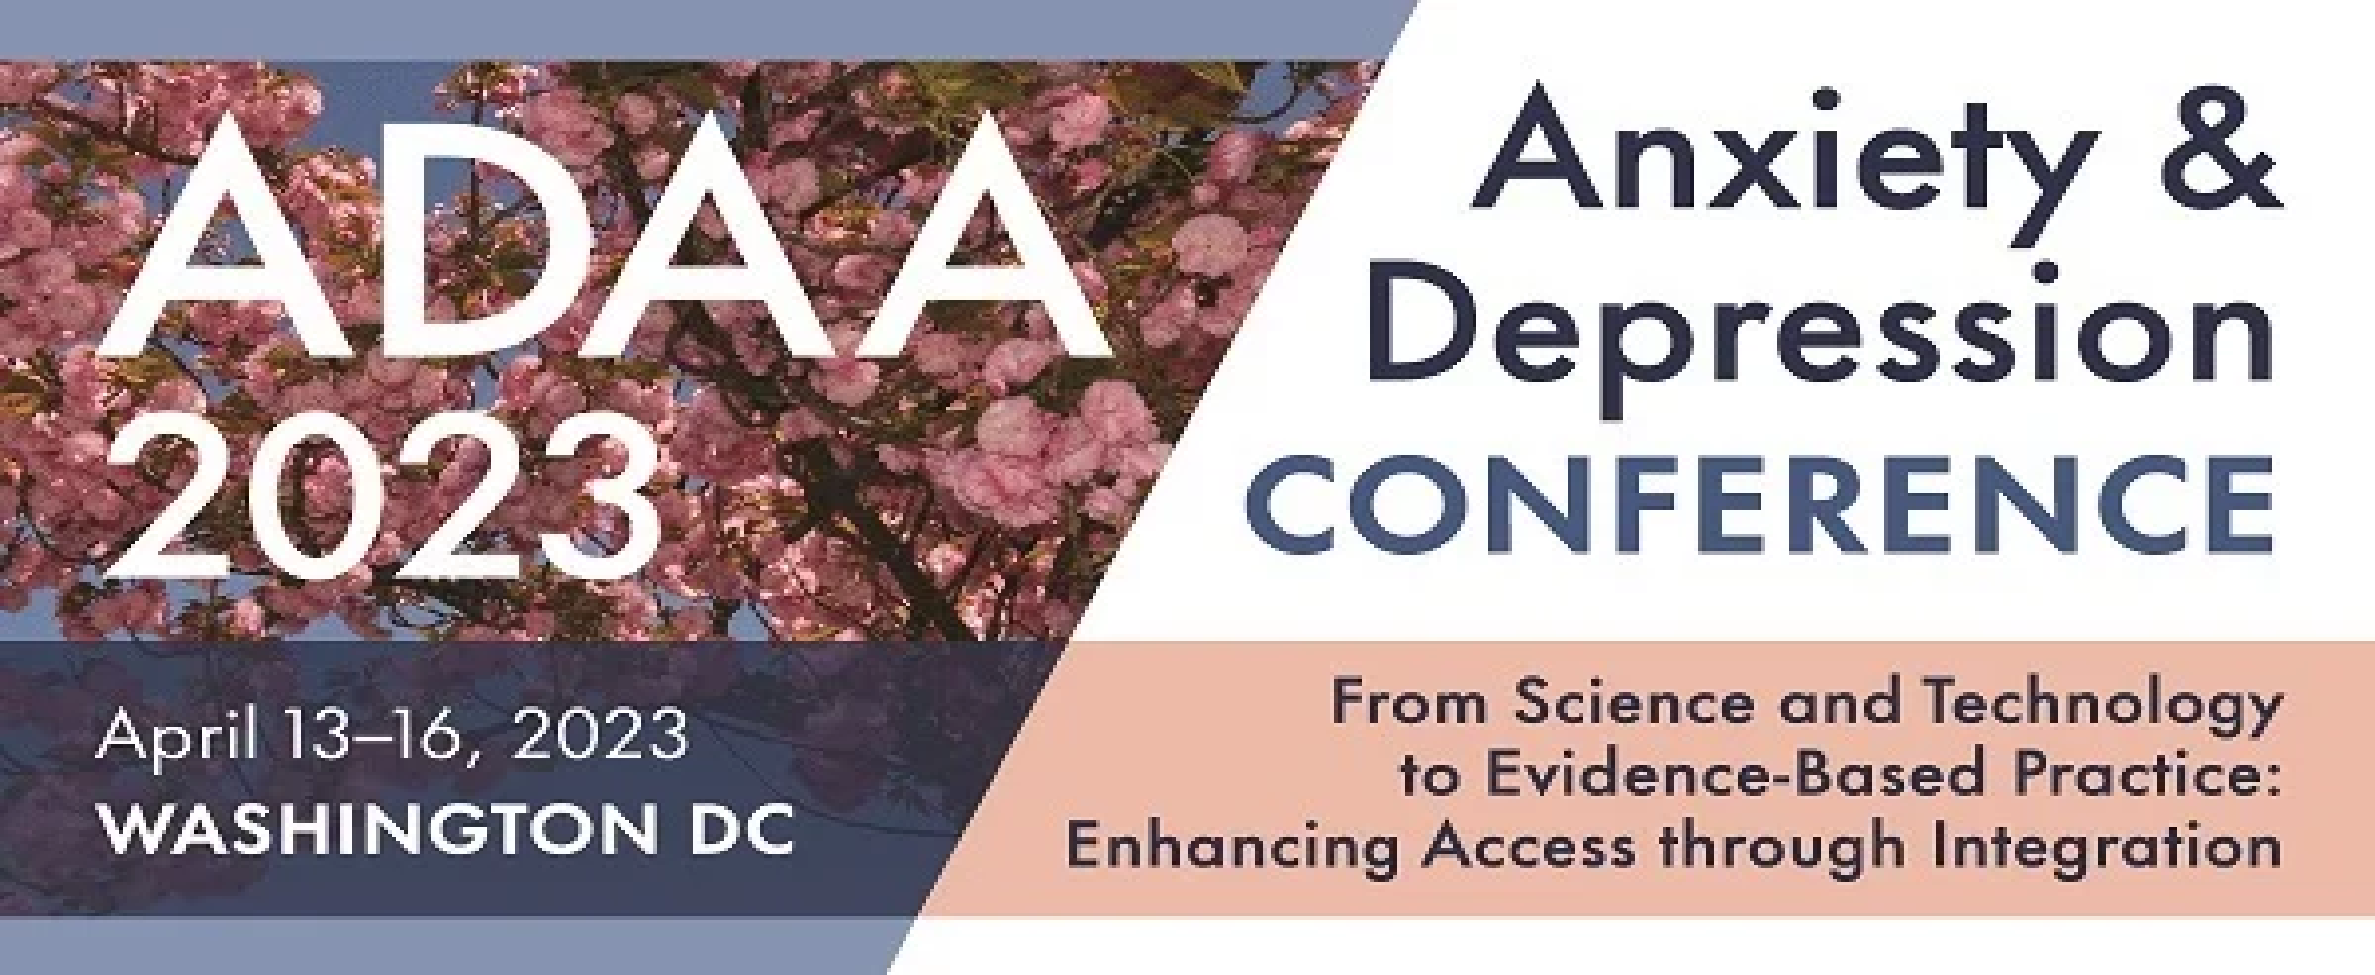 Anxiety And Depression Conference - ADAA 2023